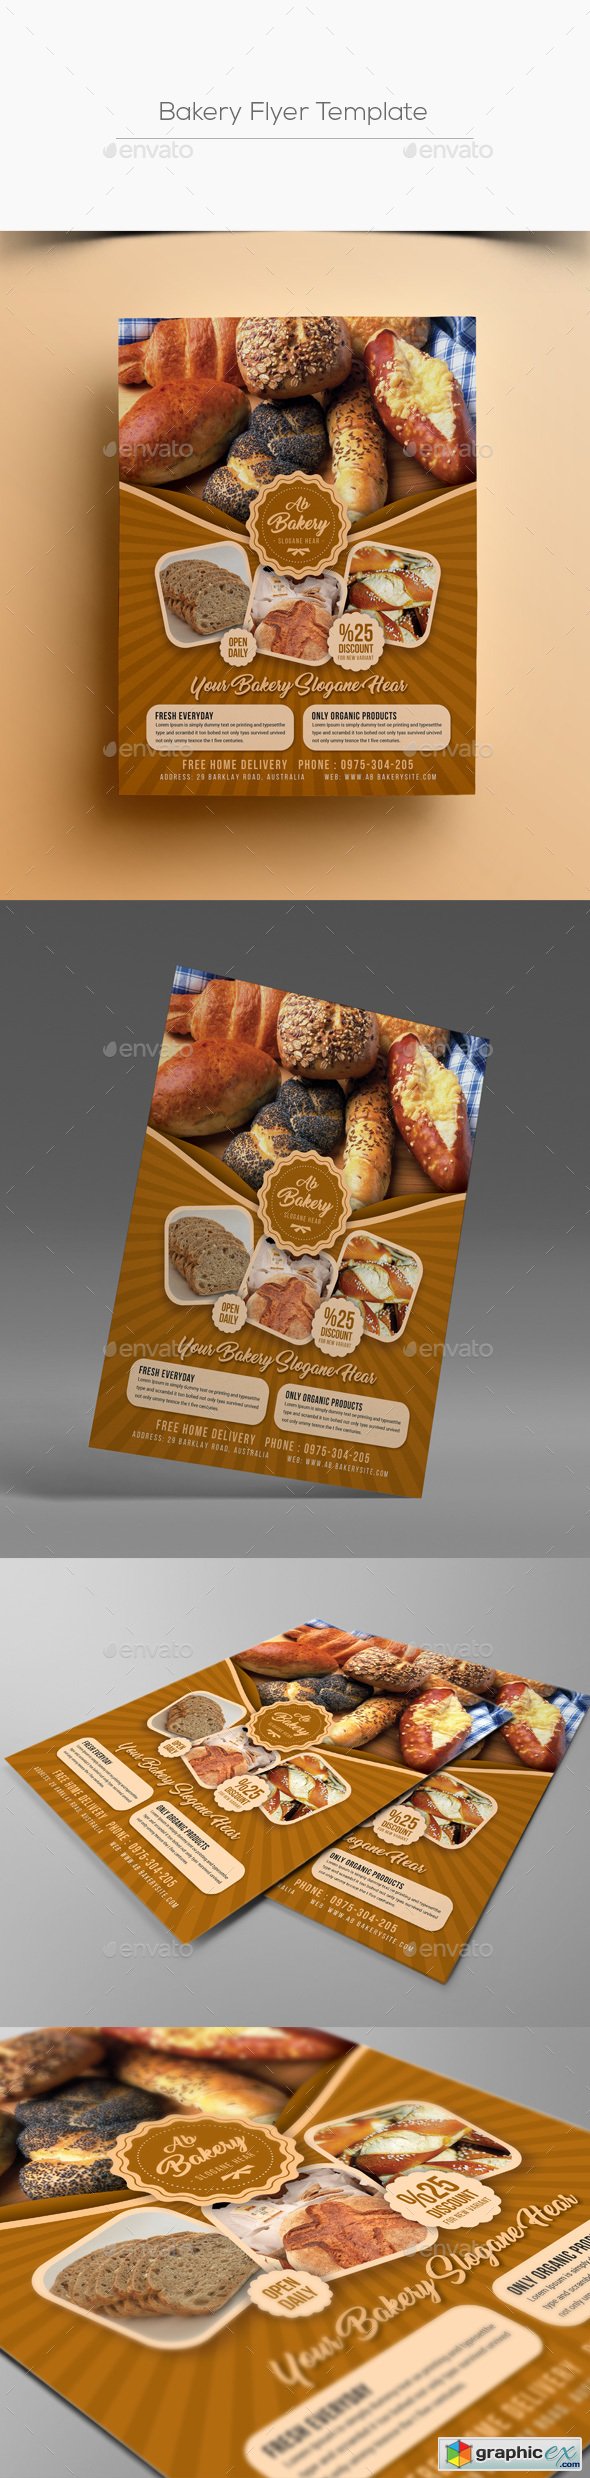 Bakery Flyer Template 19968114 Free Download Vector Stock Image